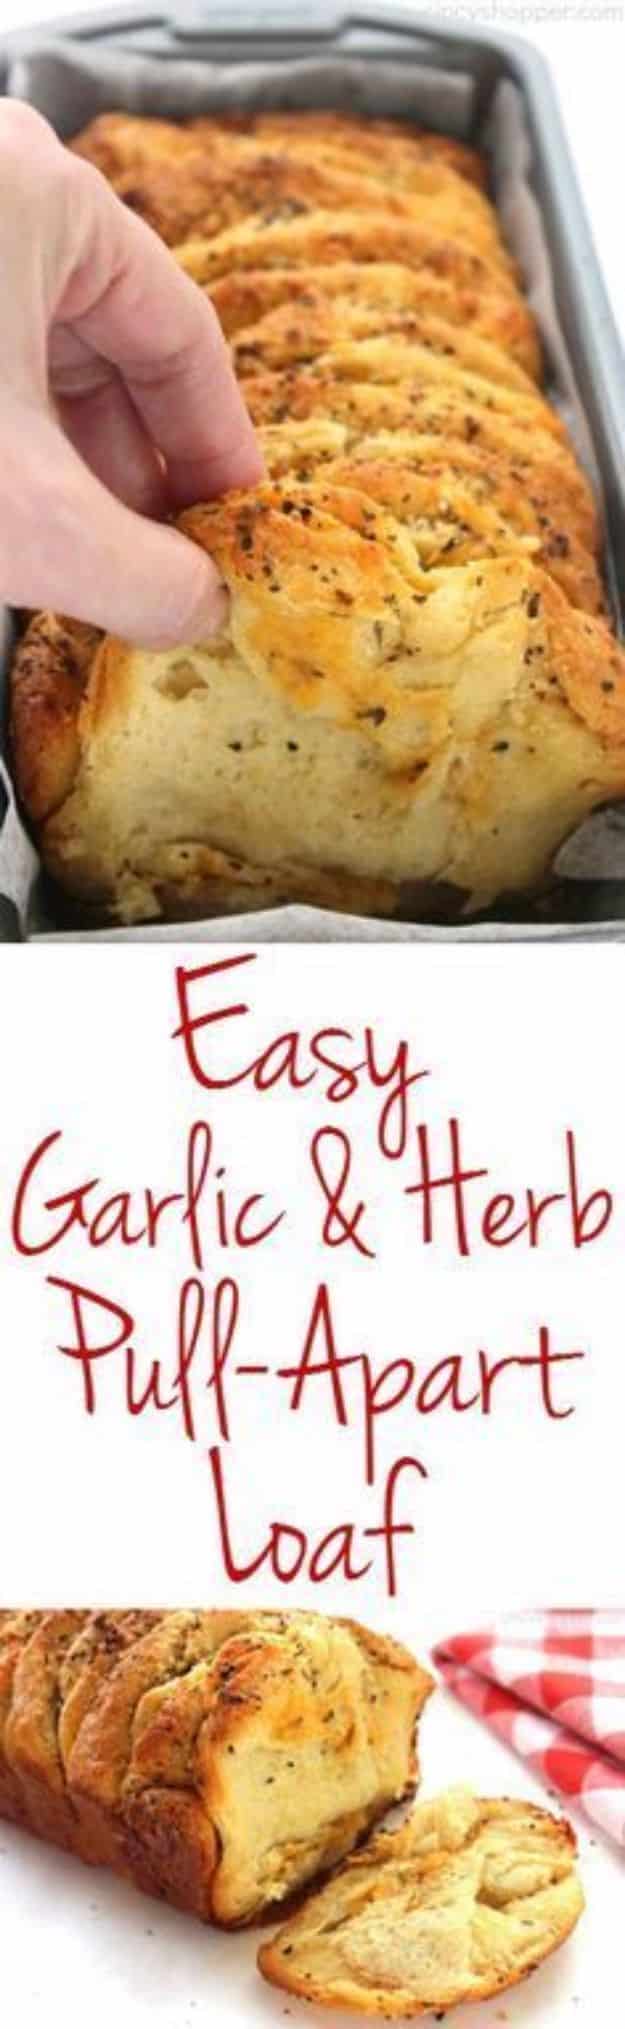 Best Canned Biscuit Recipes - Easy Garlic And Herb Pull-Apart Loaf - Cool DIY Recipe Ideas You Can Make With A Can of Biscuits - Easy Breakfast, Lunch, Dinner and Desserts You Can Make From Pillsbury Pull Apart Biscuits - Garlic, Sour Cream, Ground Beef, Sweet and Savory, Ideas with Cheese - Delicious Meals on A Budget With Step by Step Tutorials 